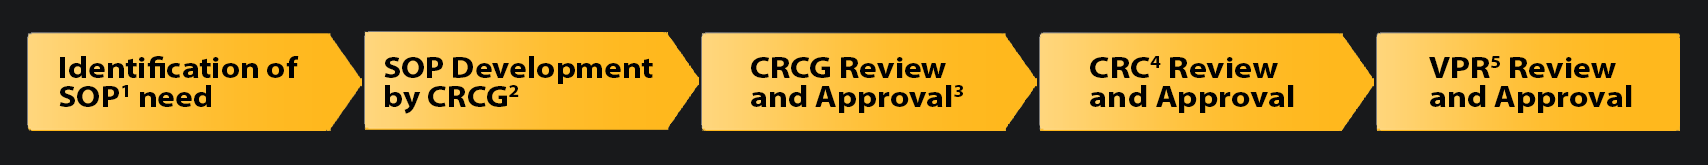 Clinical Research SOP Development Process in 5 Steps: Step 1: Identification of SOP Need (footnote 1); Step 2: SOP Development by CRCG (footnote 2); Step 3: CRCG Review and Approval (footnote 3); STEP 4: CRC Review and Approval (footnote 4); STEP 5: VPR Review and Approval (footnote 5).